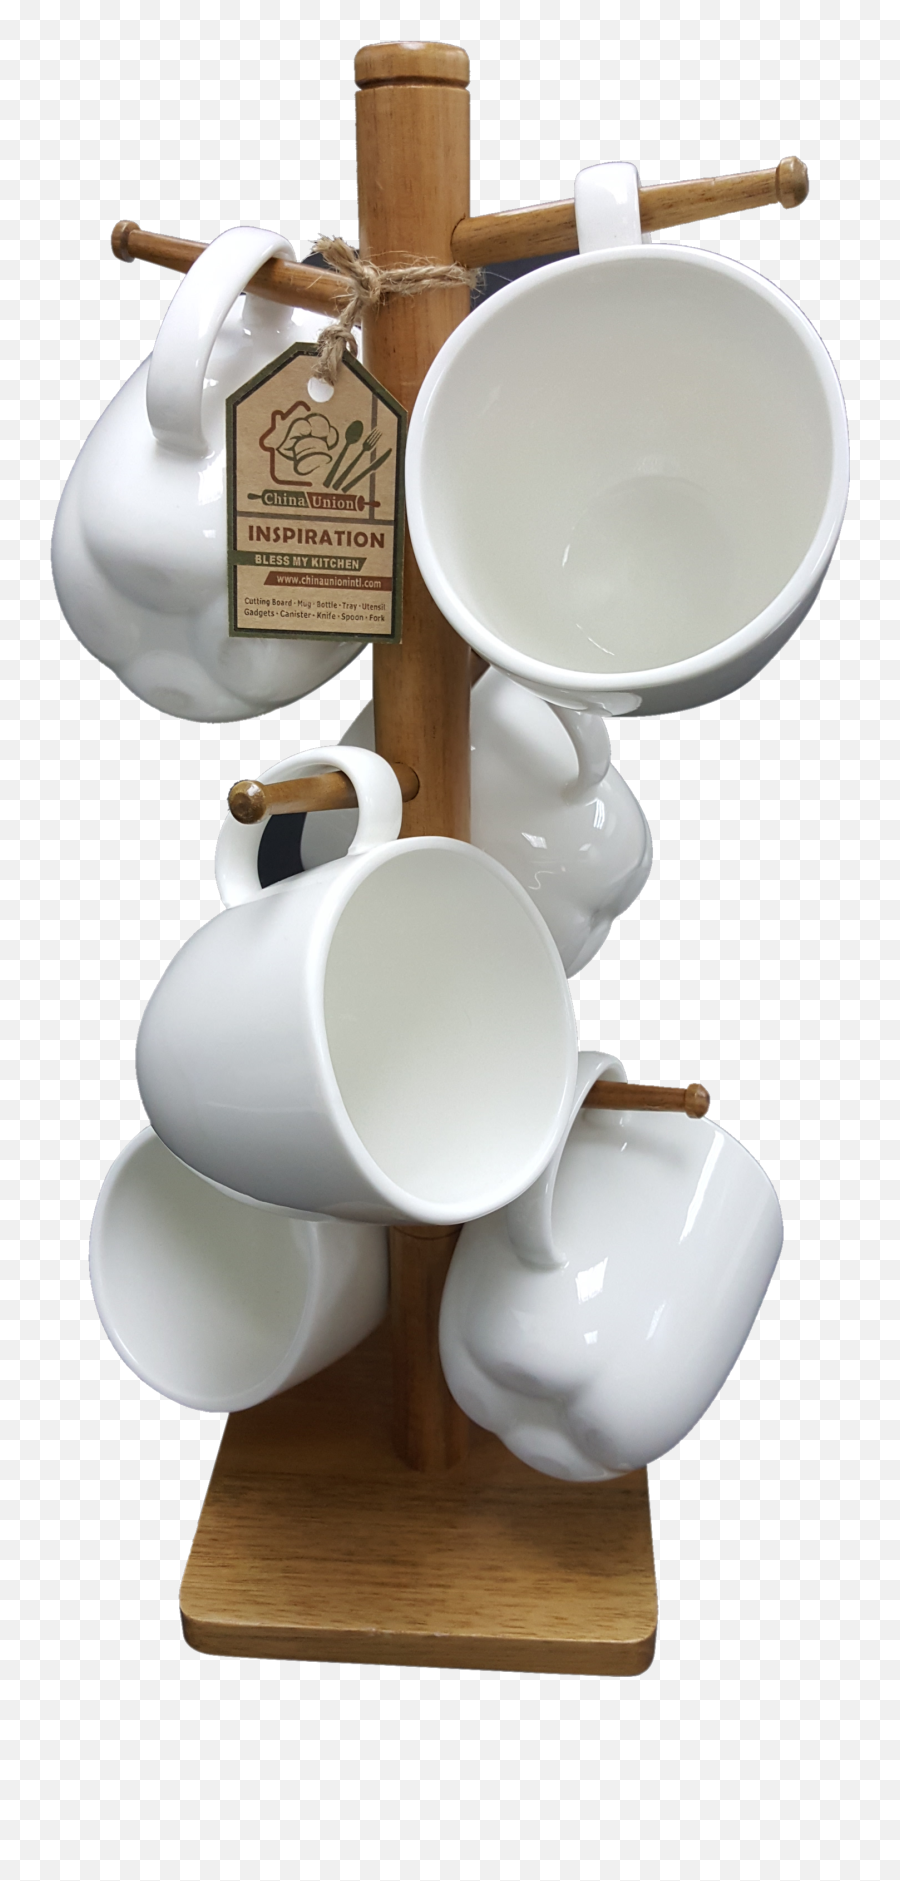 Cu50399 - Teacup Png,Stand Png